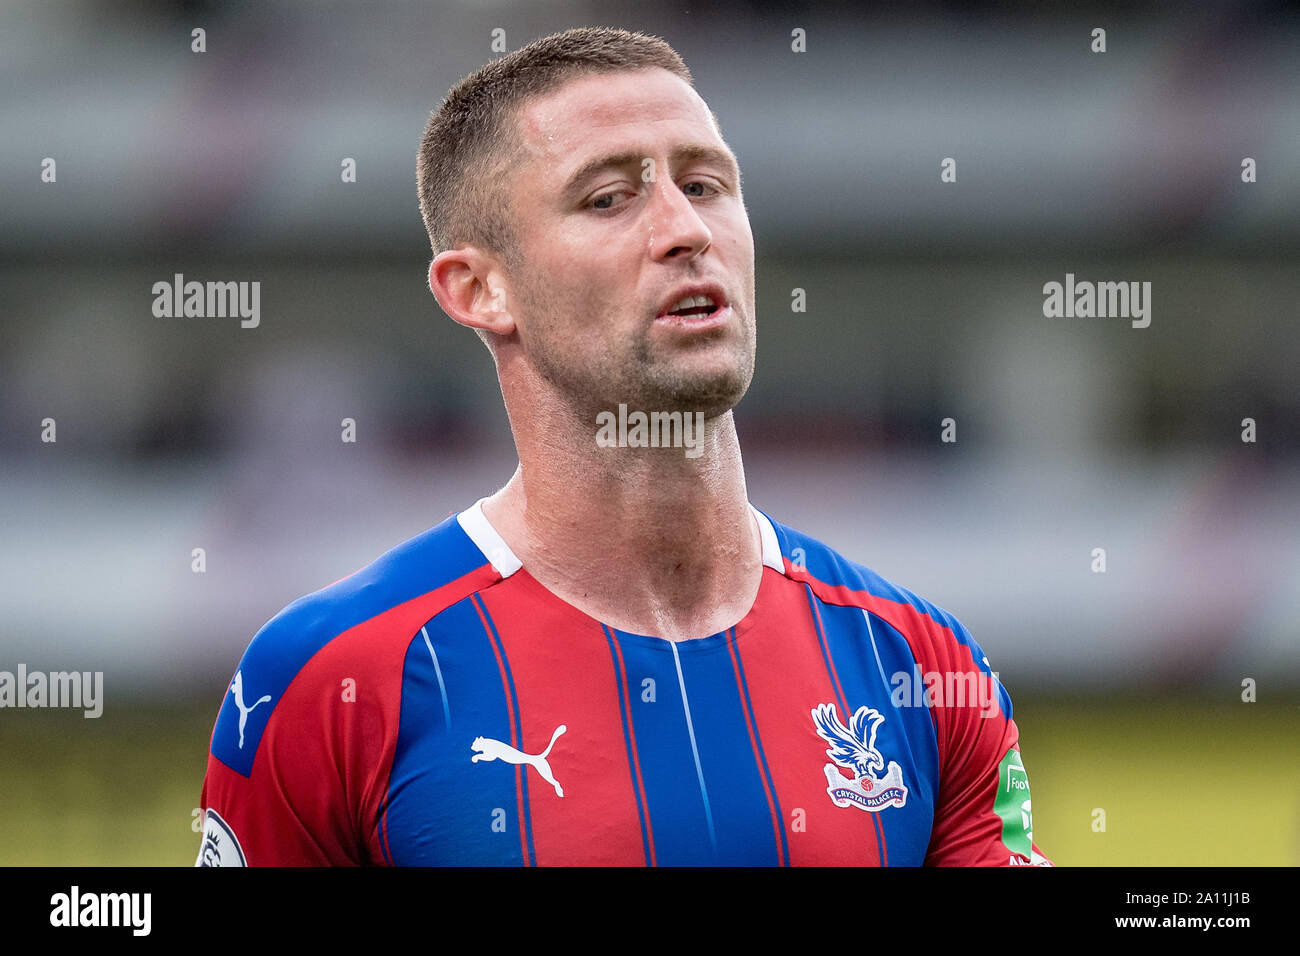 LONDON, ENGLAND - SEPTEMBER 22: Gary Cahill of Crystal Palace reaction during the Premier League match between Crystal Palace and Wolverhampton Wanderers at Selhurst Park on September 22, 2019 in London, United Kingdom. (Photo by Sebastian Frej/MB Media) Stock Photo